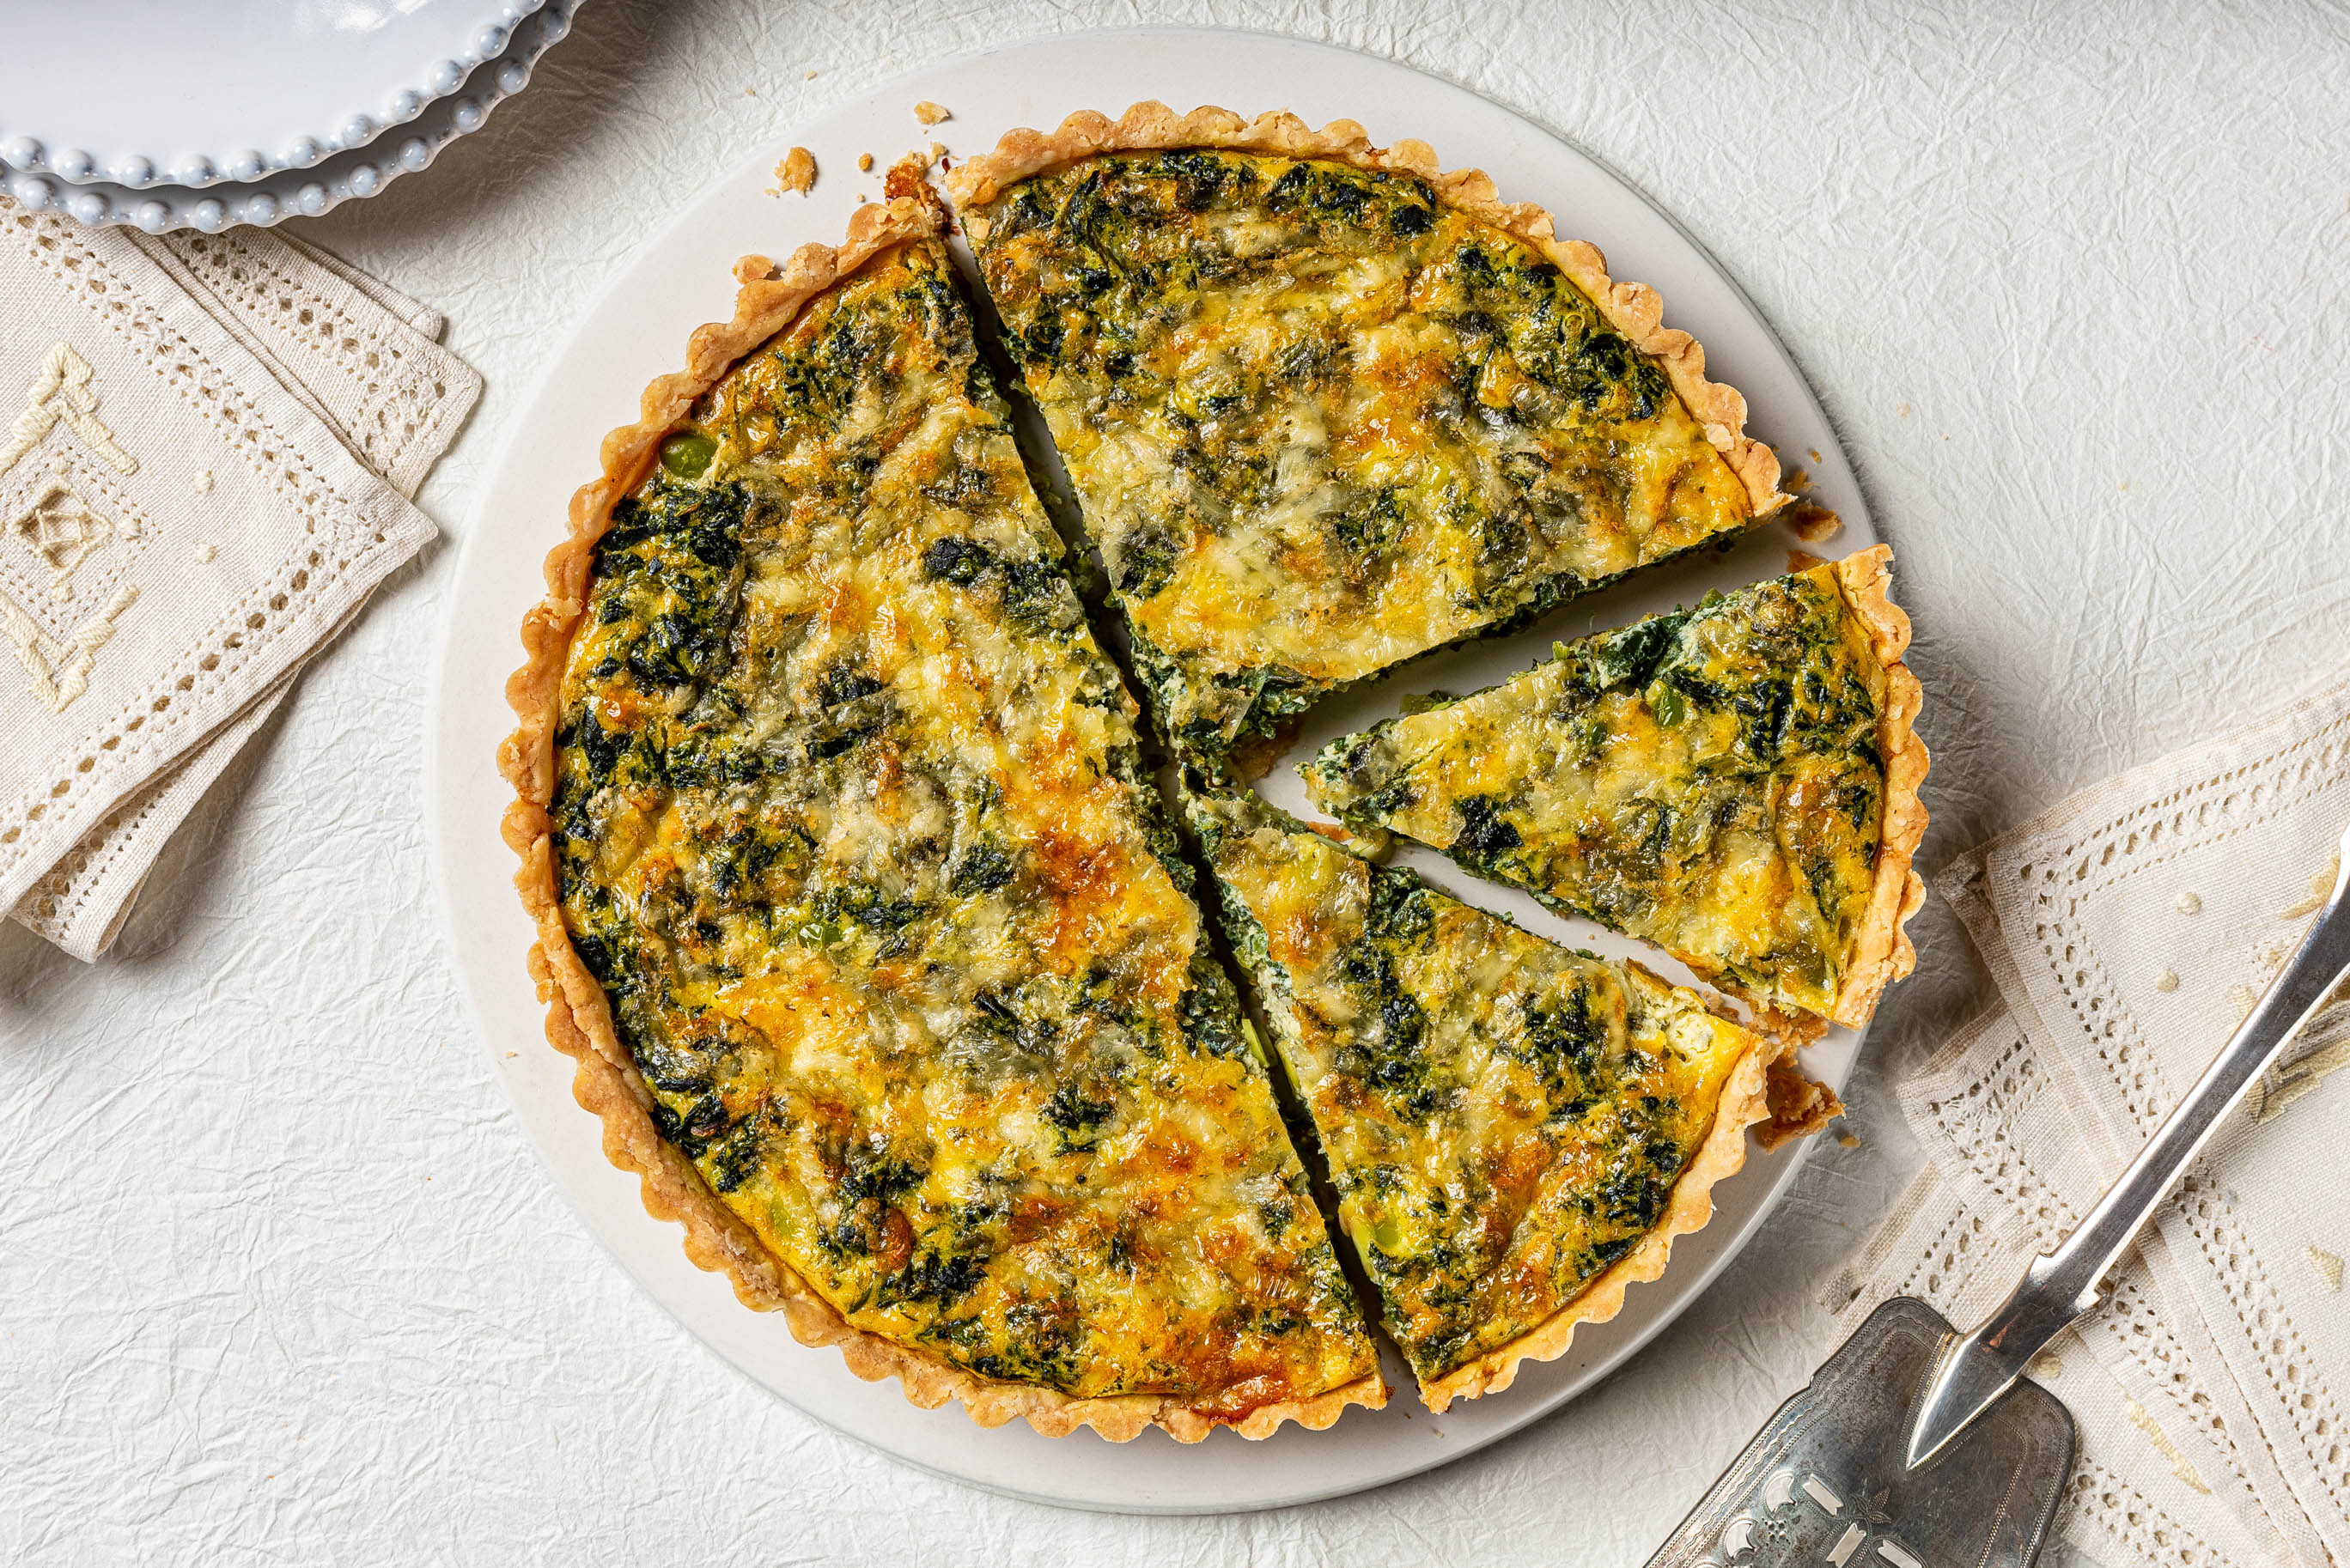 The coronation quiche was a royal mess. Now it's fit for a king

